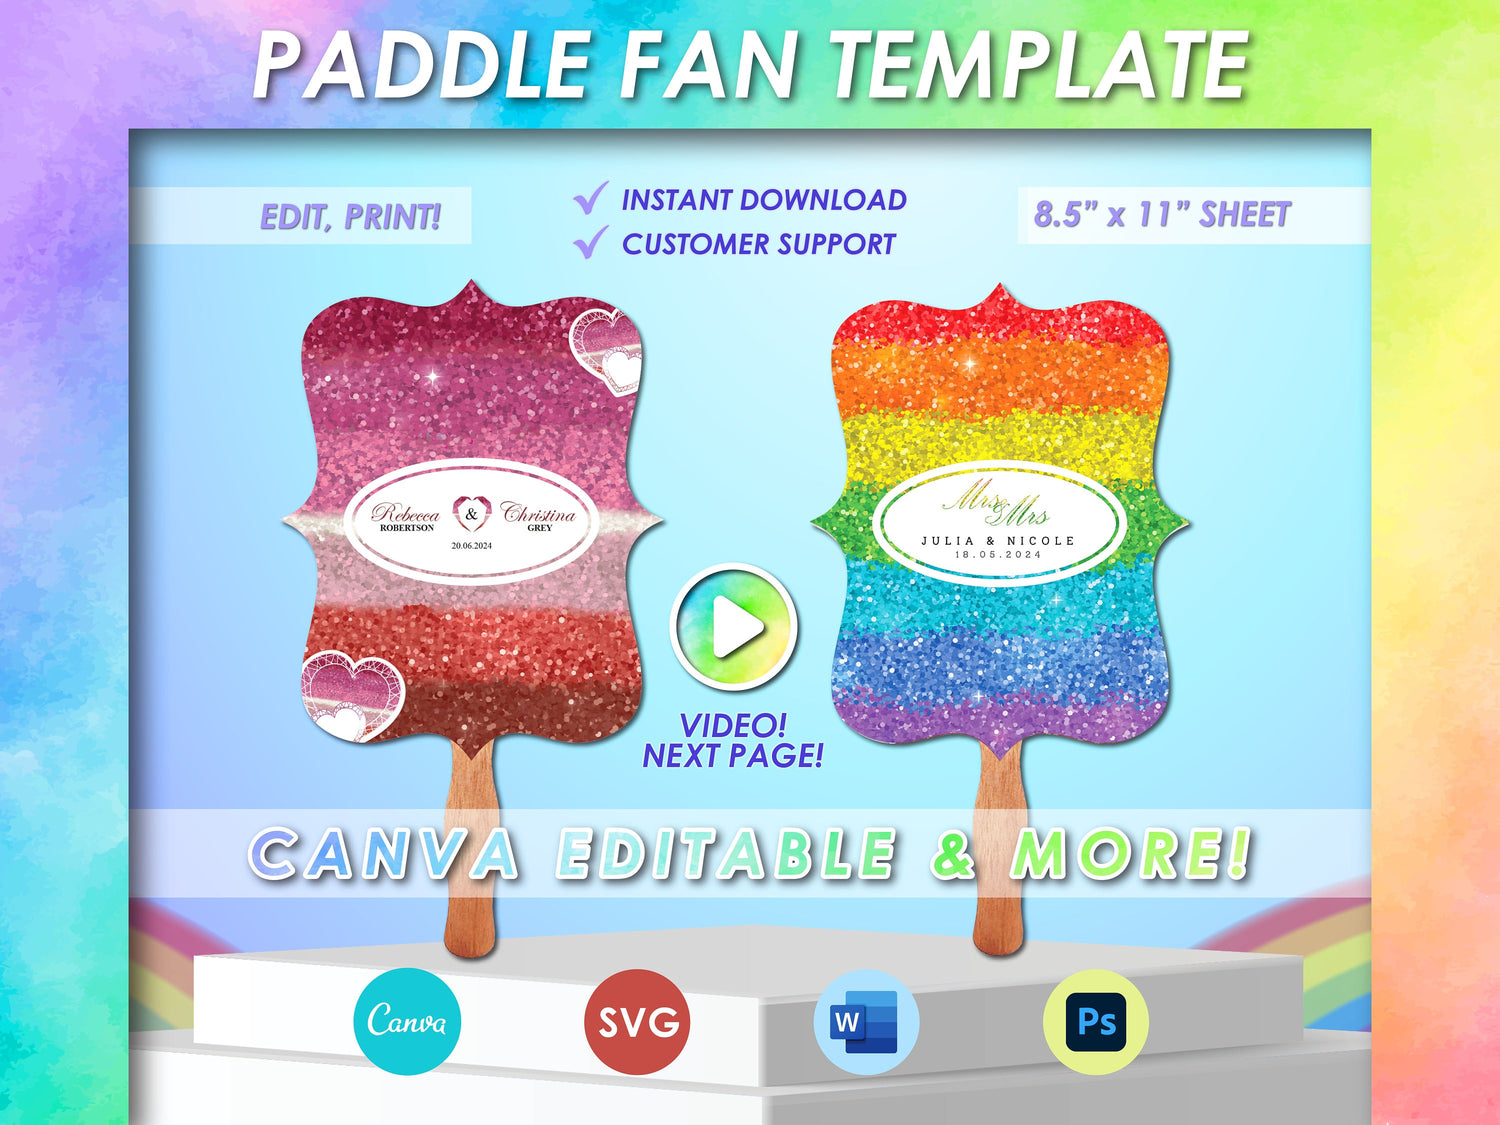 Prideful flag paddle, Perfect for gay/lesbian wedding, Editable paddle fan with Canva, Instant Download paddle template, Customizable